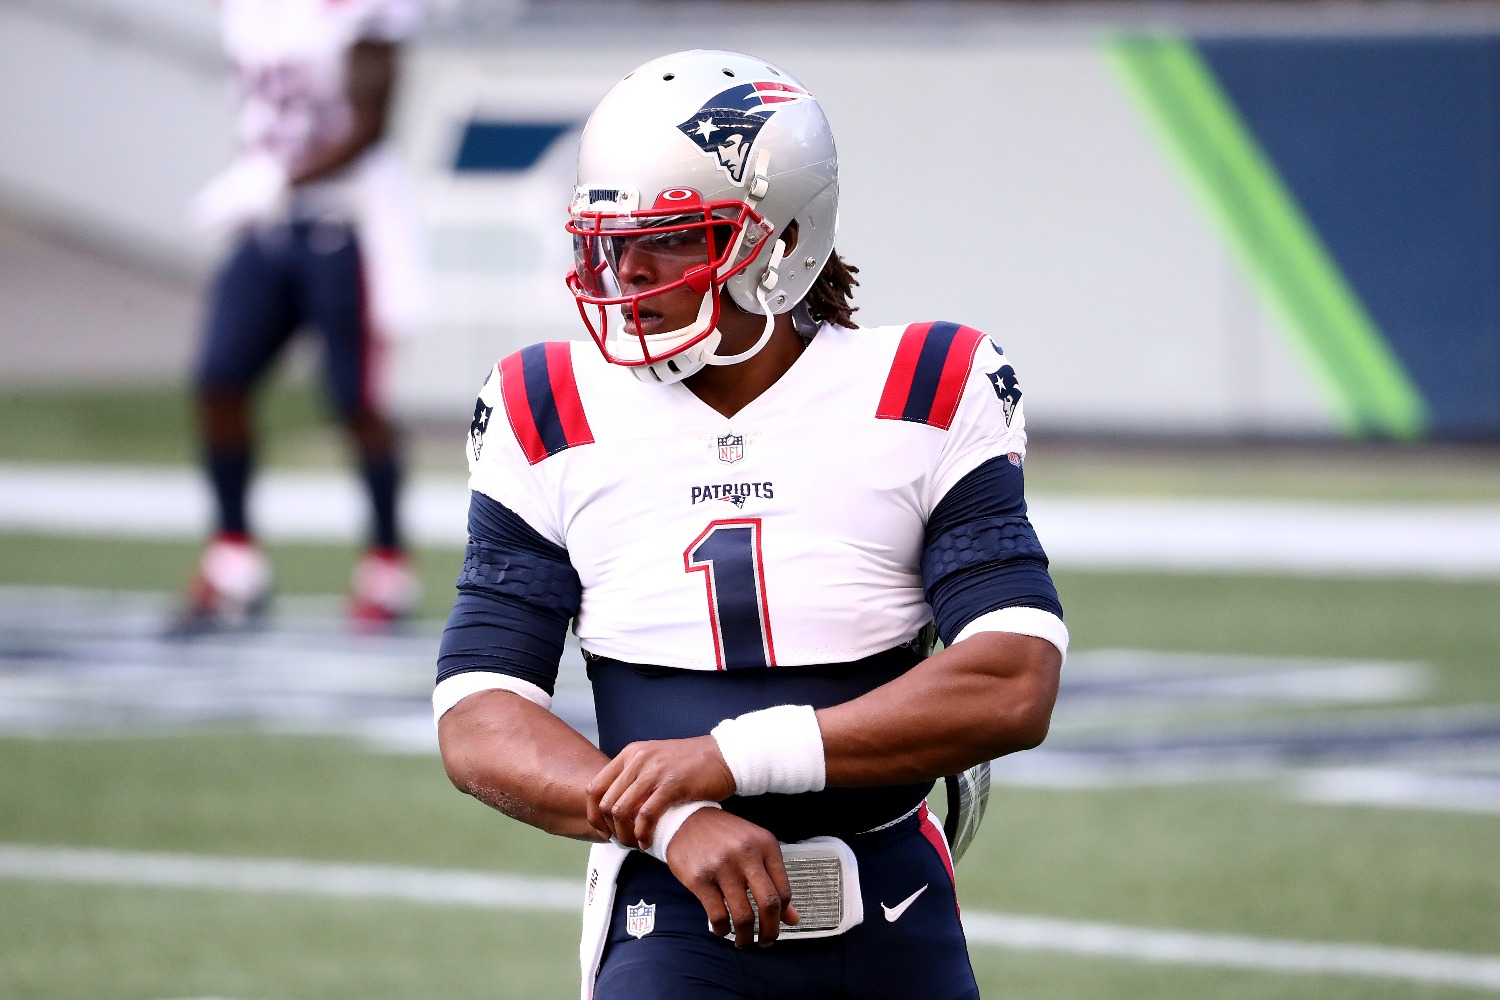 Cam Newton just made NFL executives' worst nightmare come true, as the Patriots QB showed he's far from finished and that NFL teams made a massive mistake by passing him over in free agency.